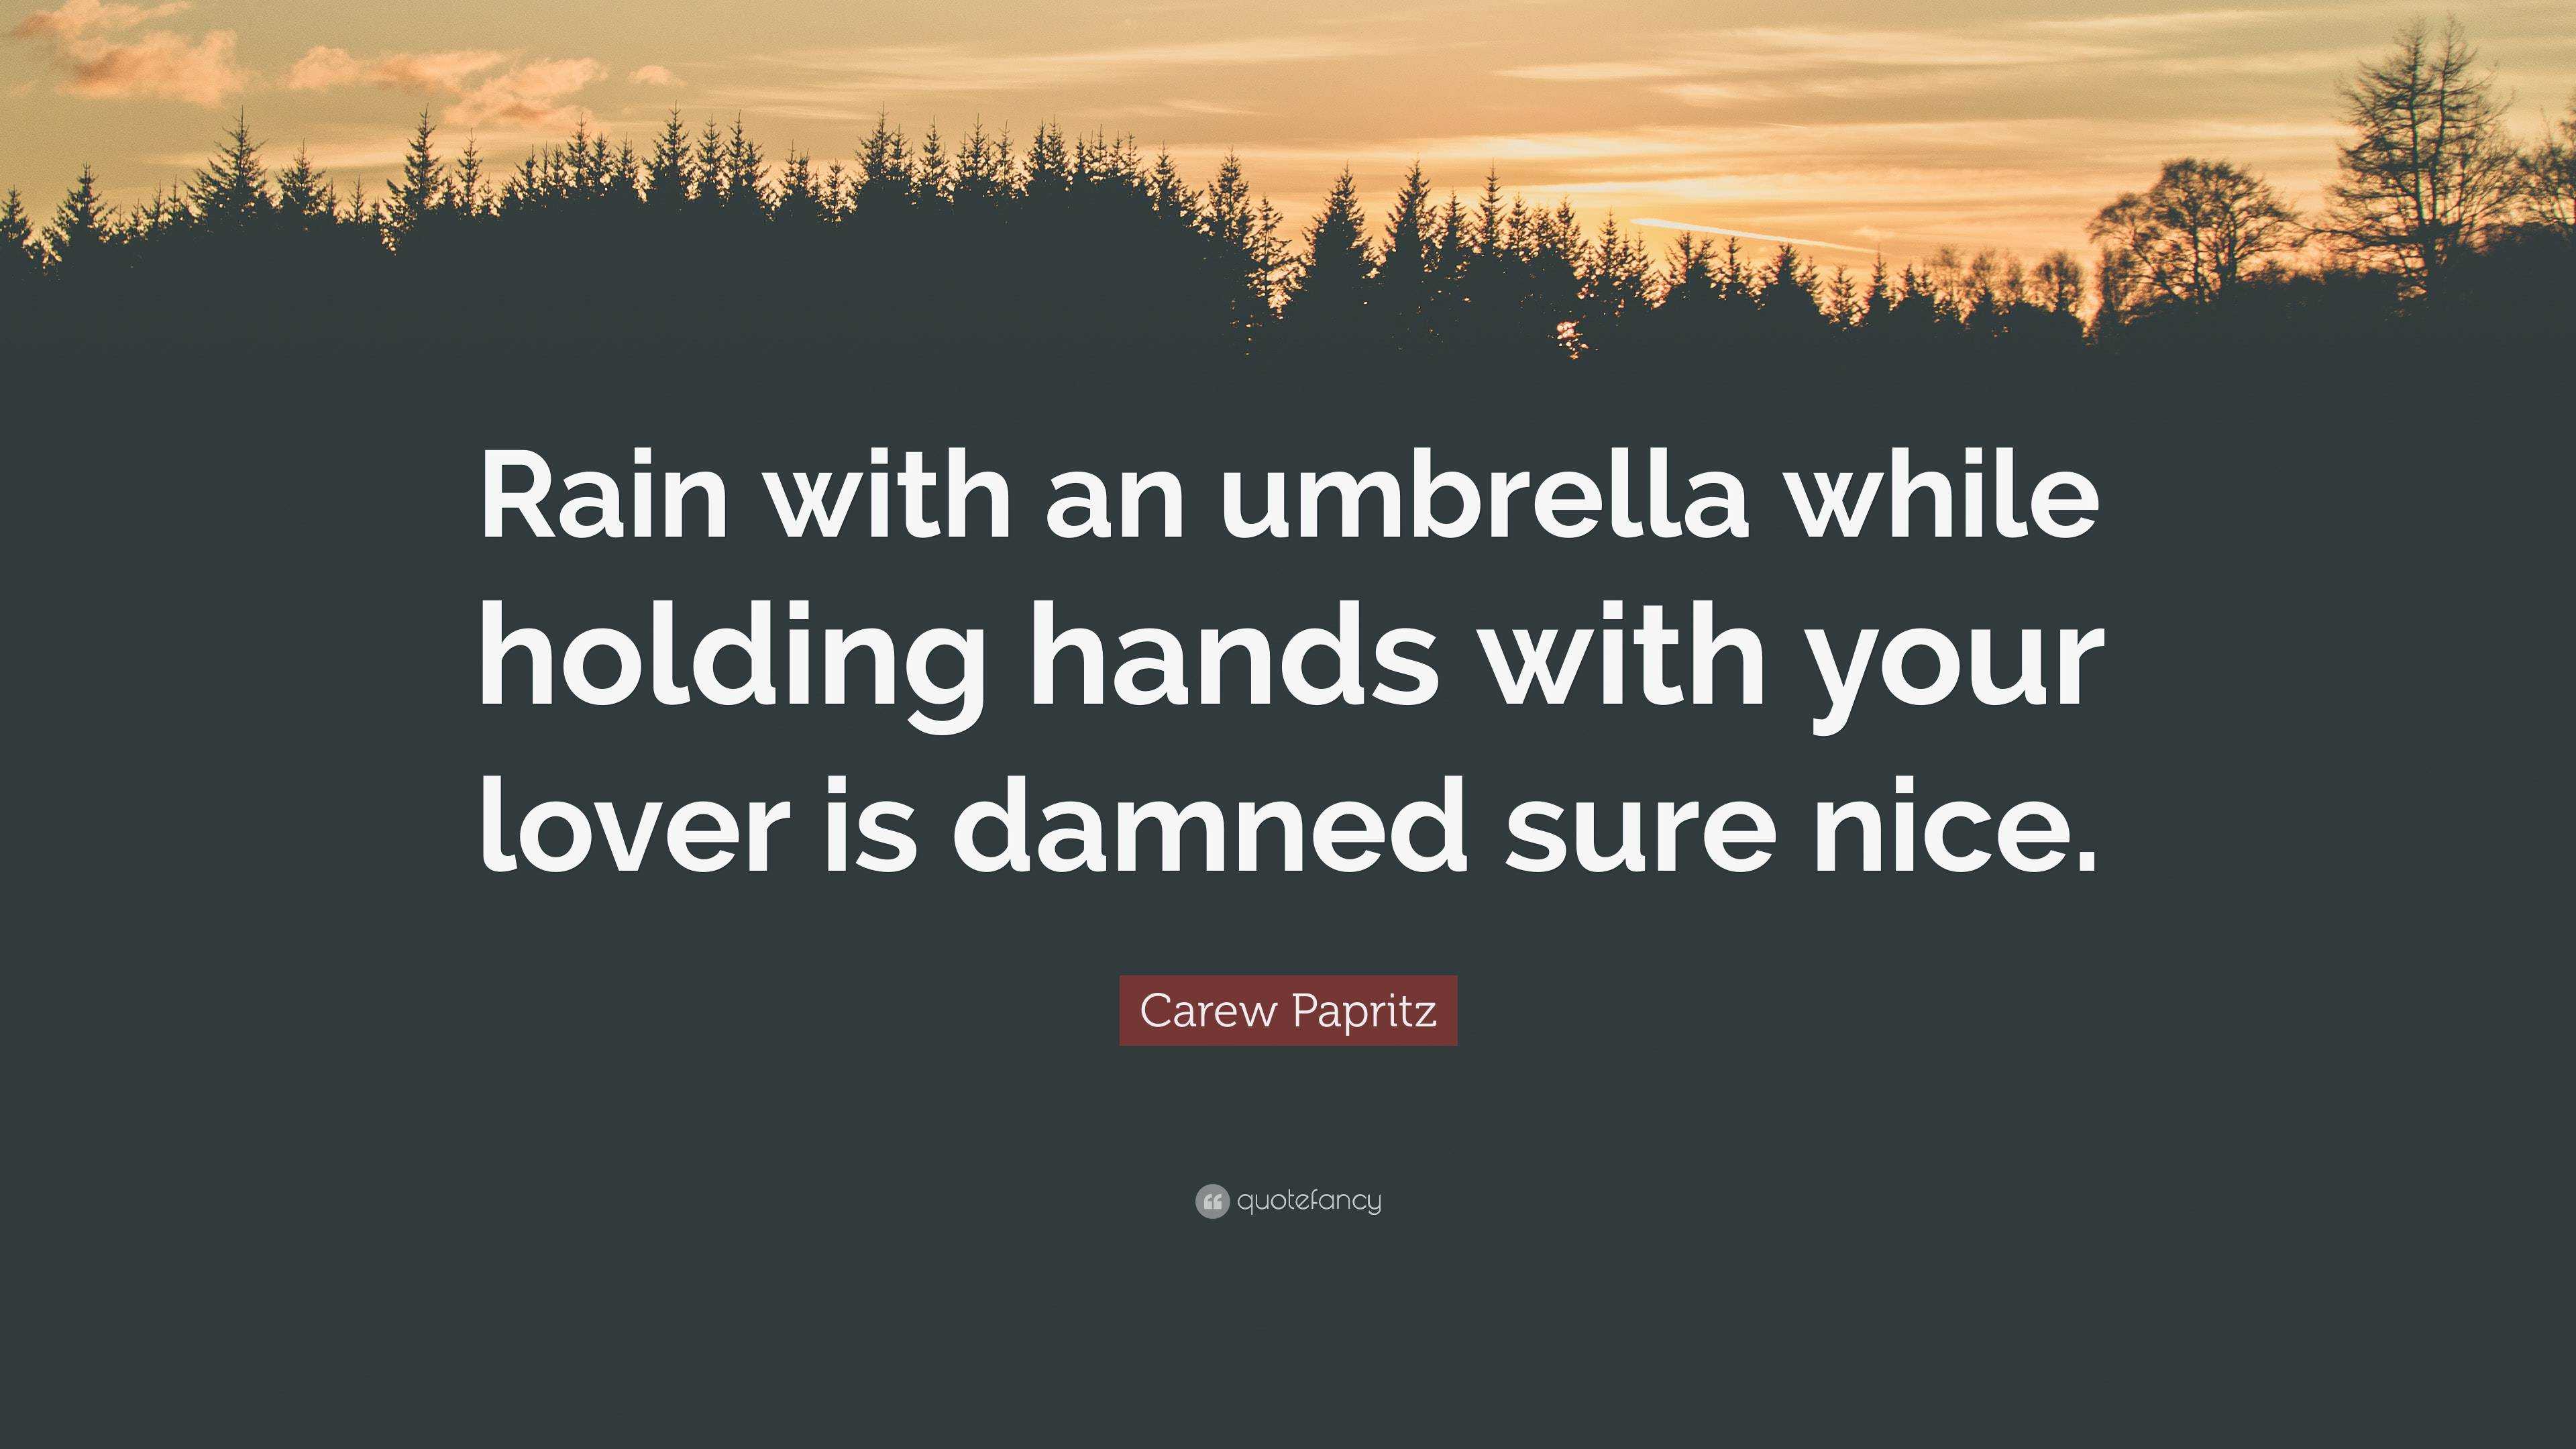 couple holding hands in the rain wallpaper